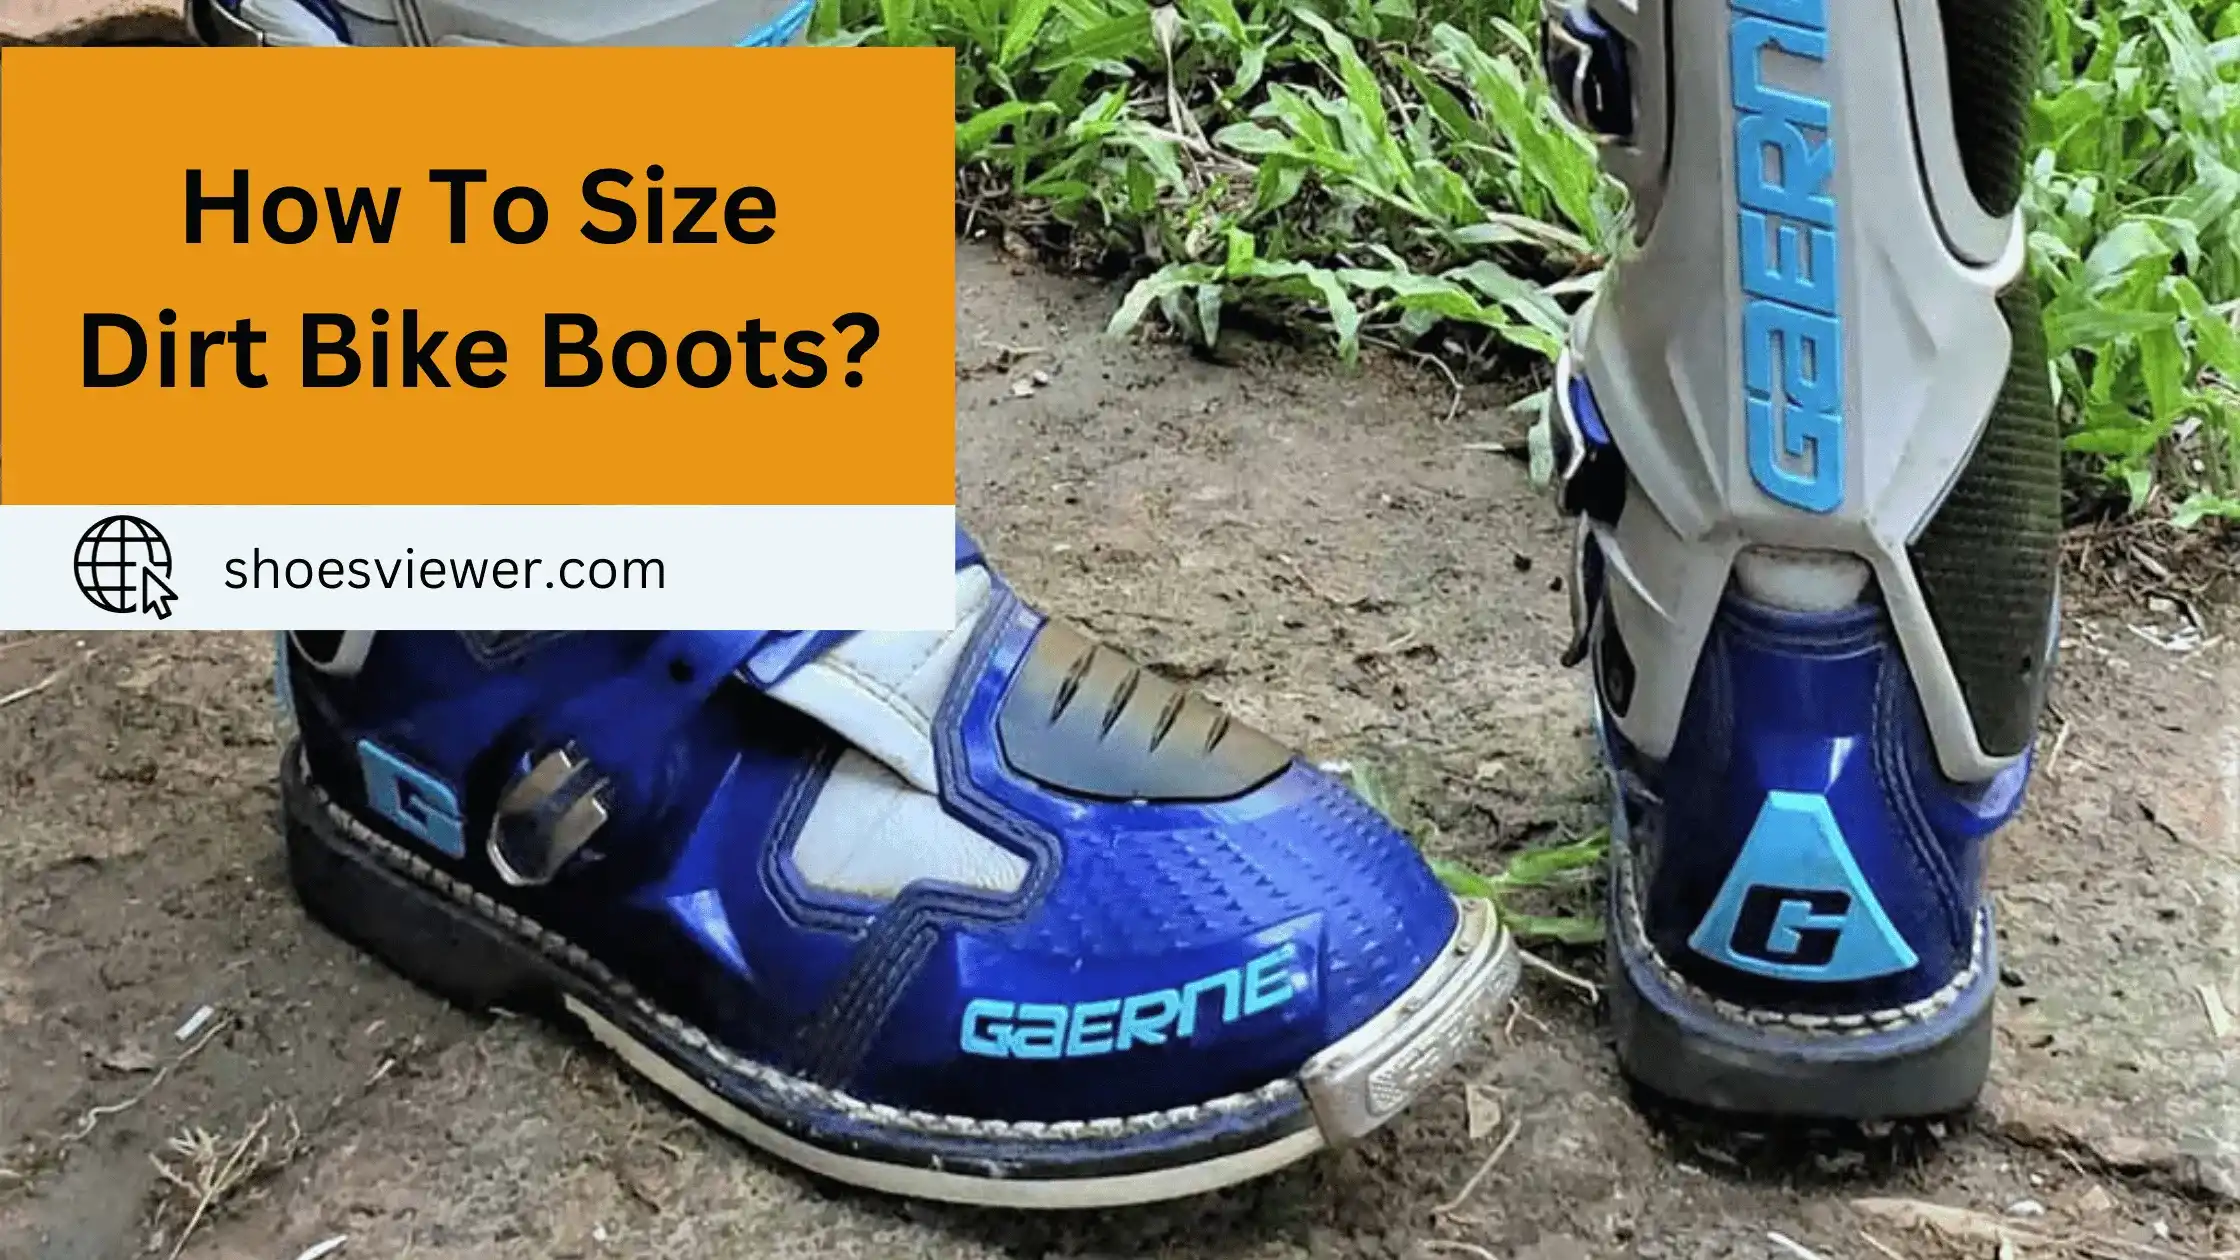 How To Size Dirt Bike Boots? A Comprehensive Guide